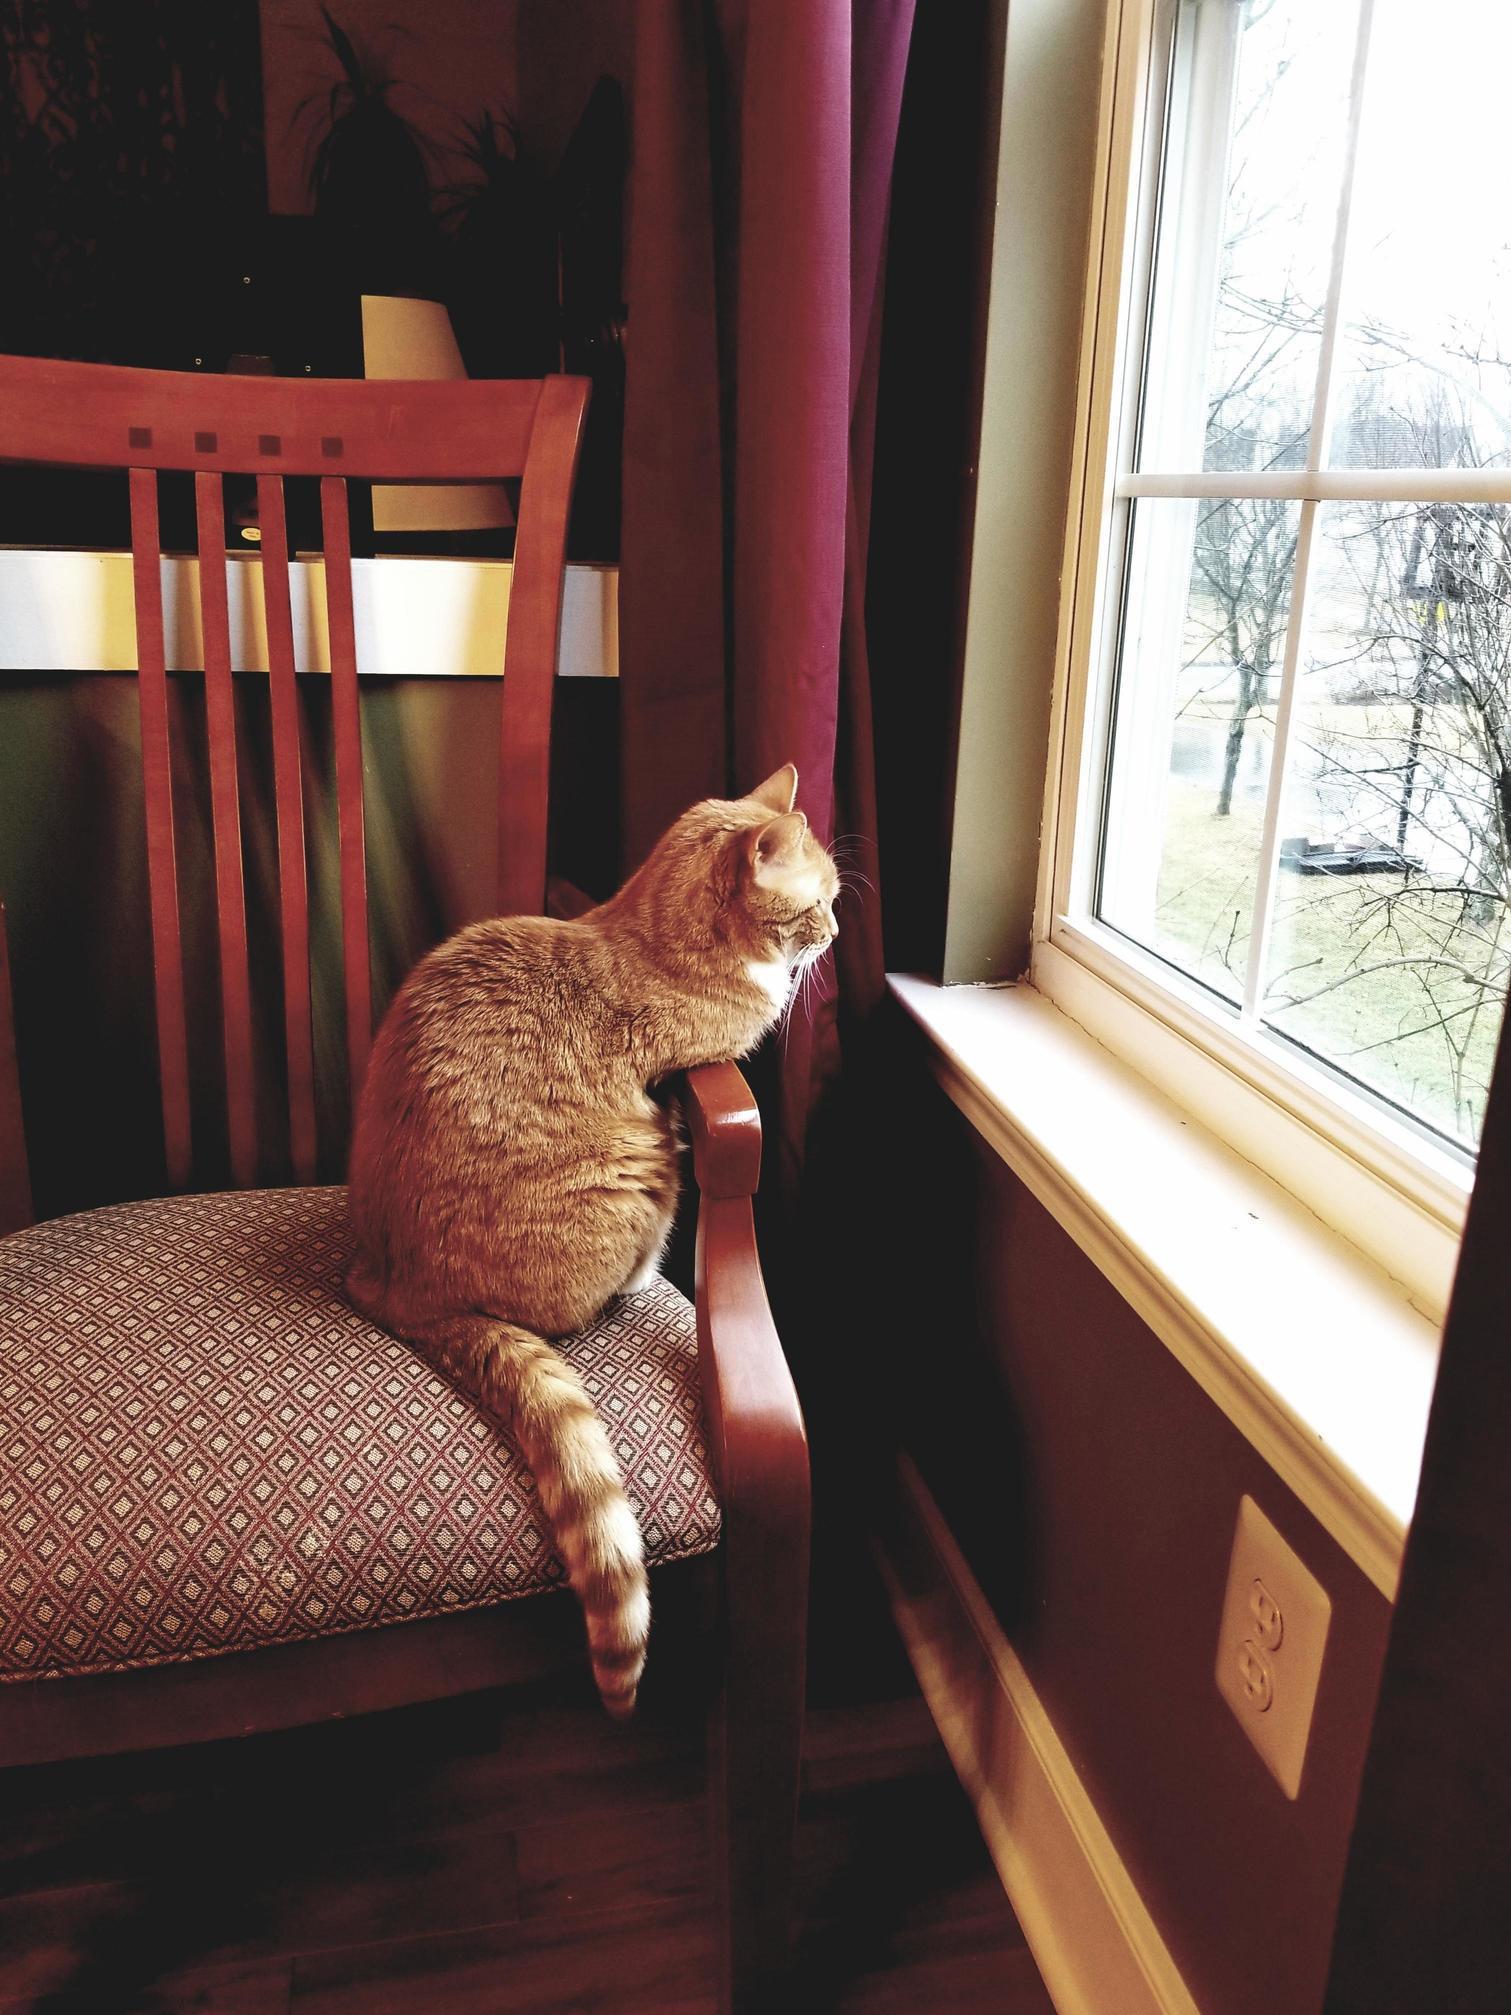 My cat sits in this chair every single morning to just gaze out the window